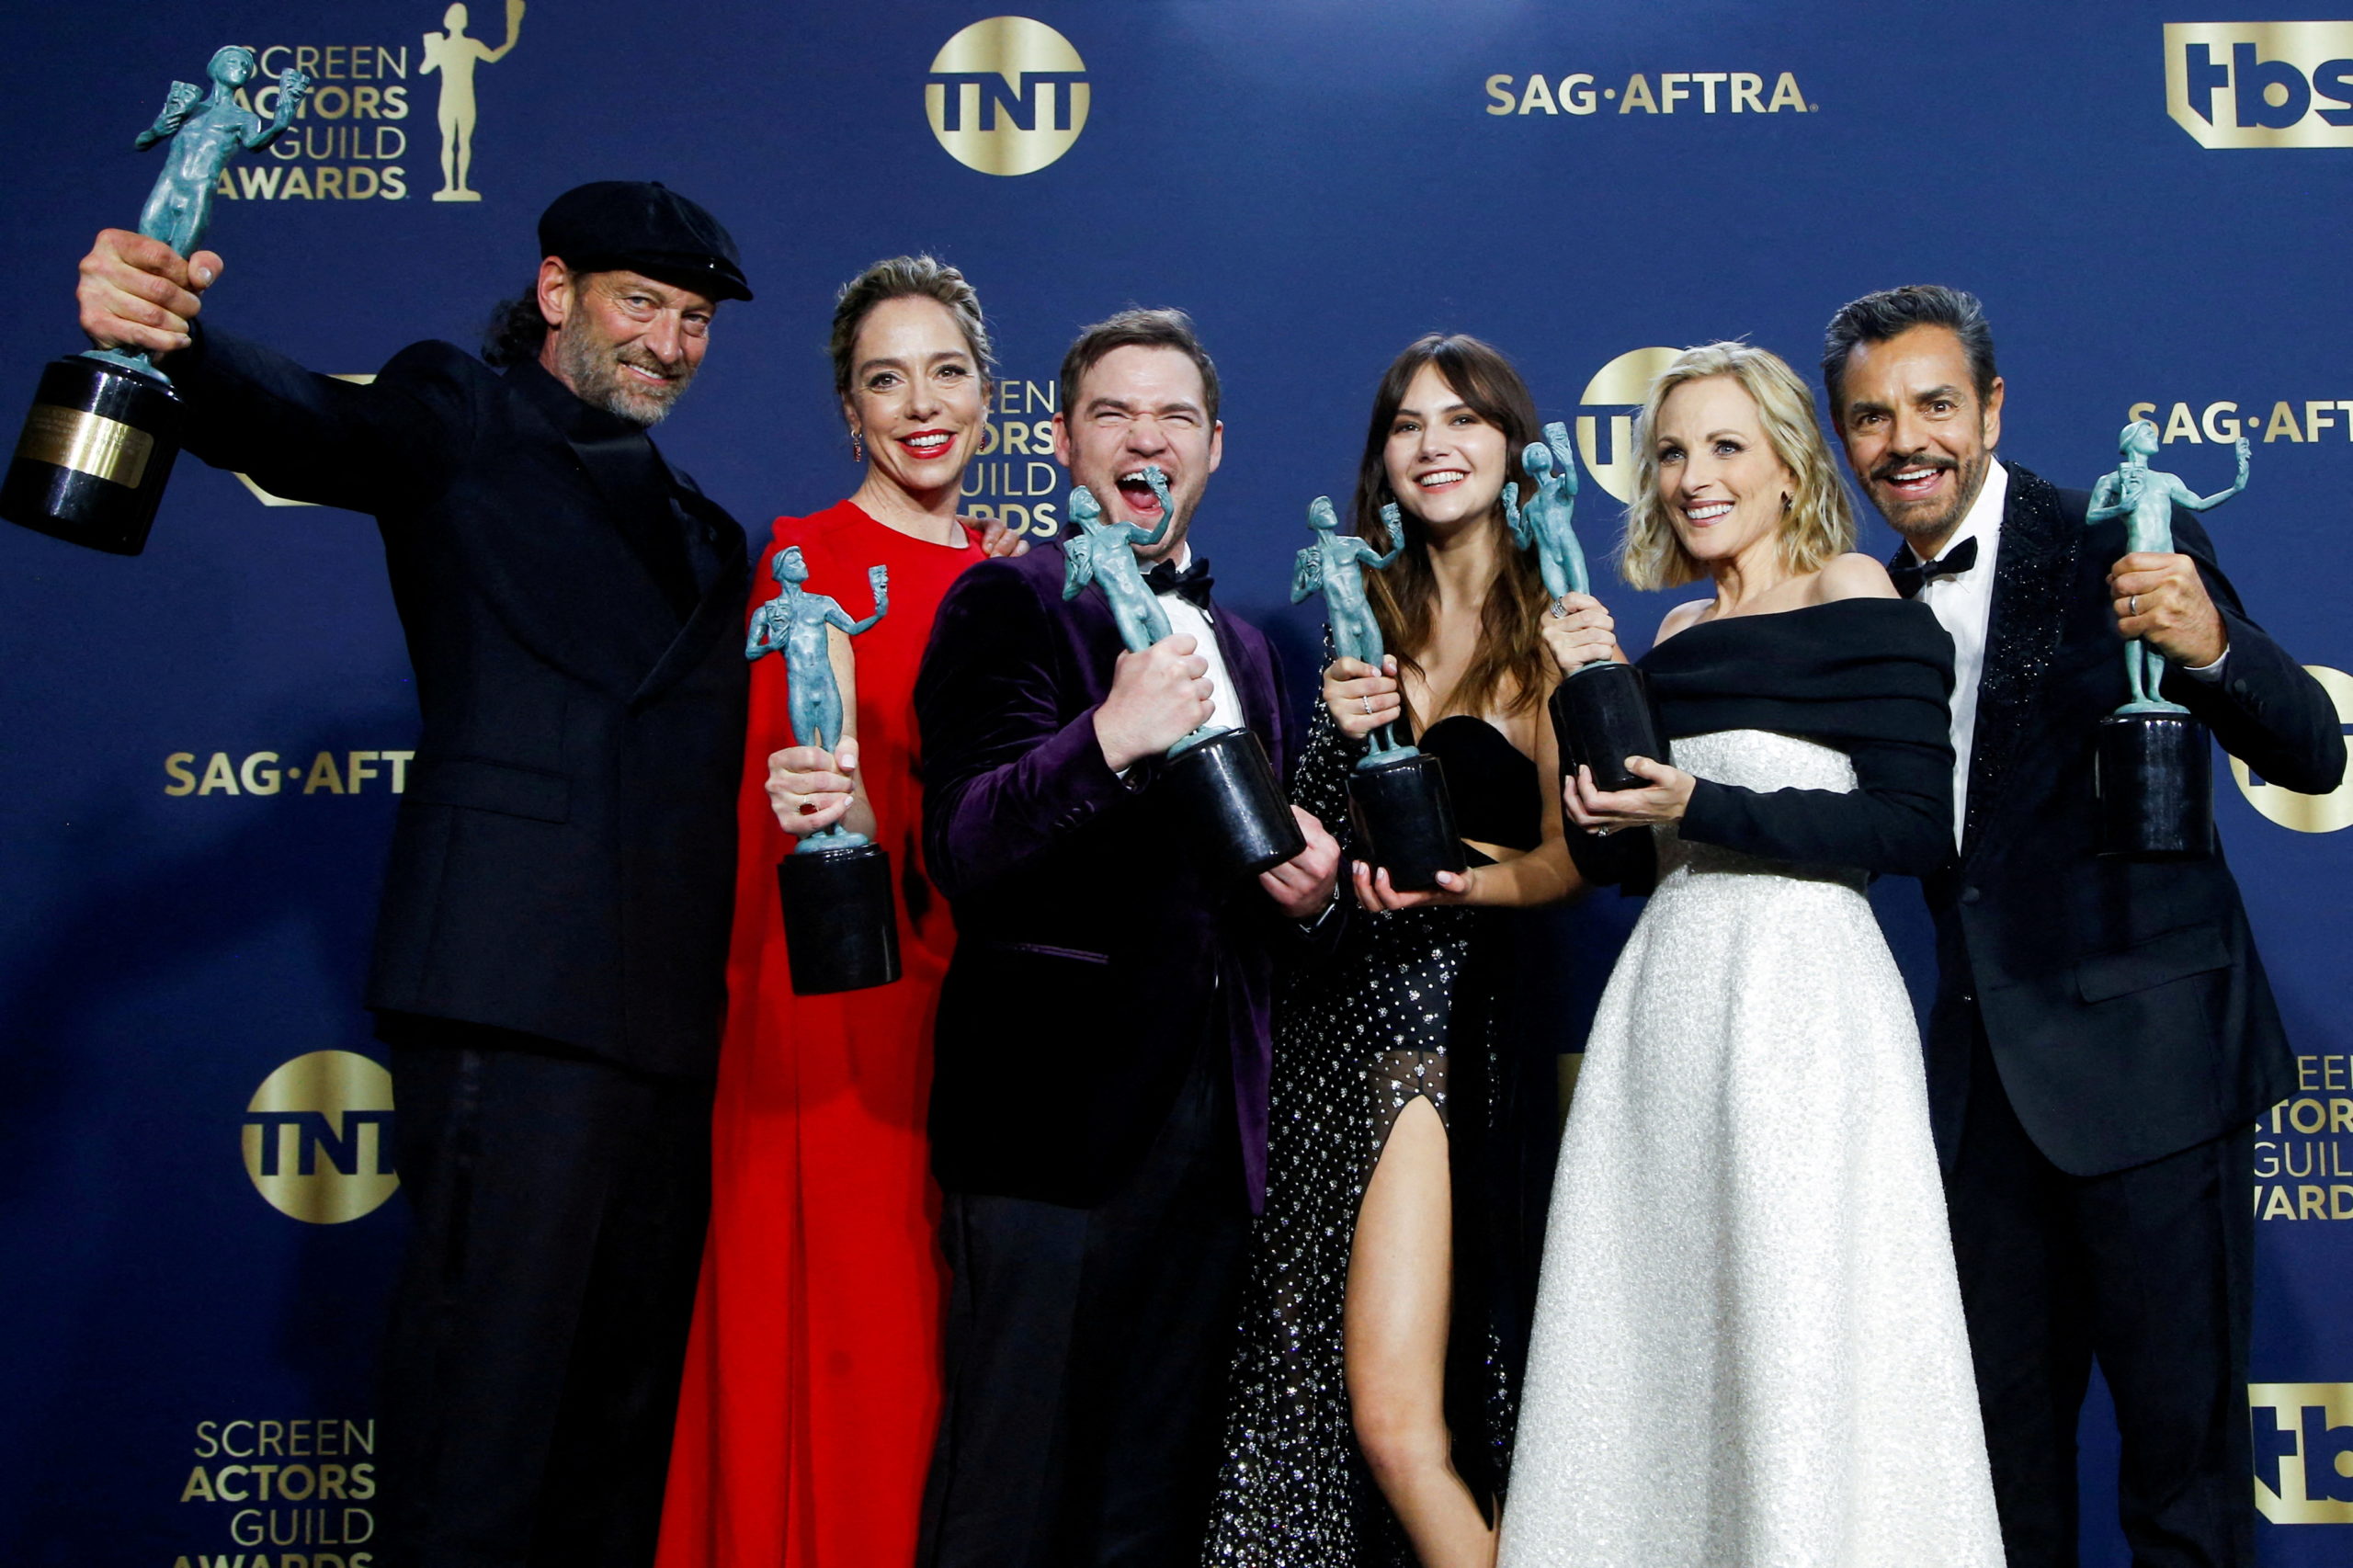 Director Sian Heder and cast members of "CODA" Troy Kotsur, Daniel Durant, Emilia Jones, Marlee Matlin and Eugenio Derbez pose backstage after winning Outstanding Performance by a Cast in a Motion Picture at the 28th Screen Actors Guild Awards, in Santa Monica, California, U.S., February 27, 2022. REUTERS/Aude Guerrucci/File Photo